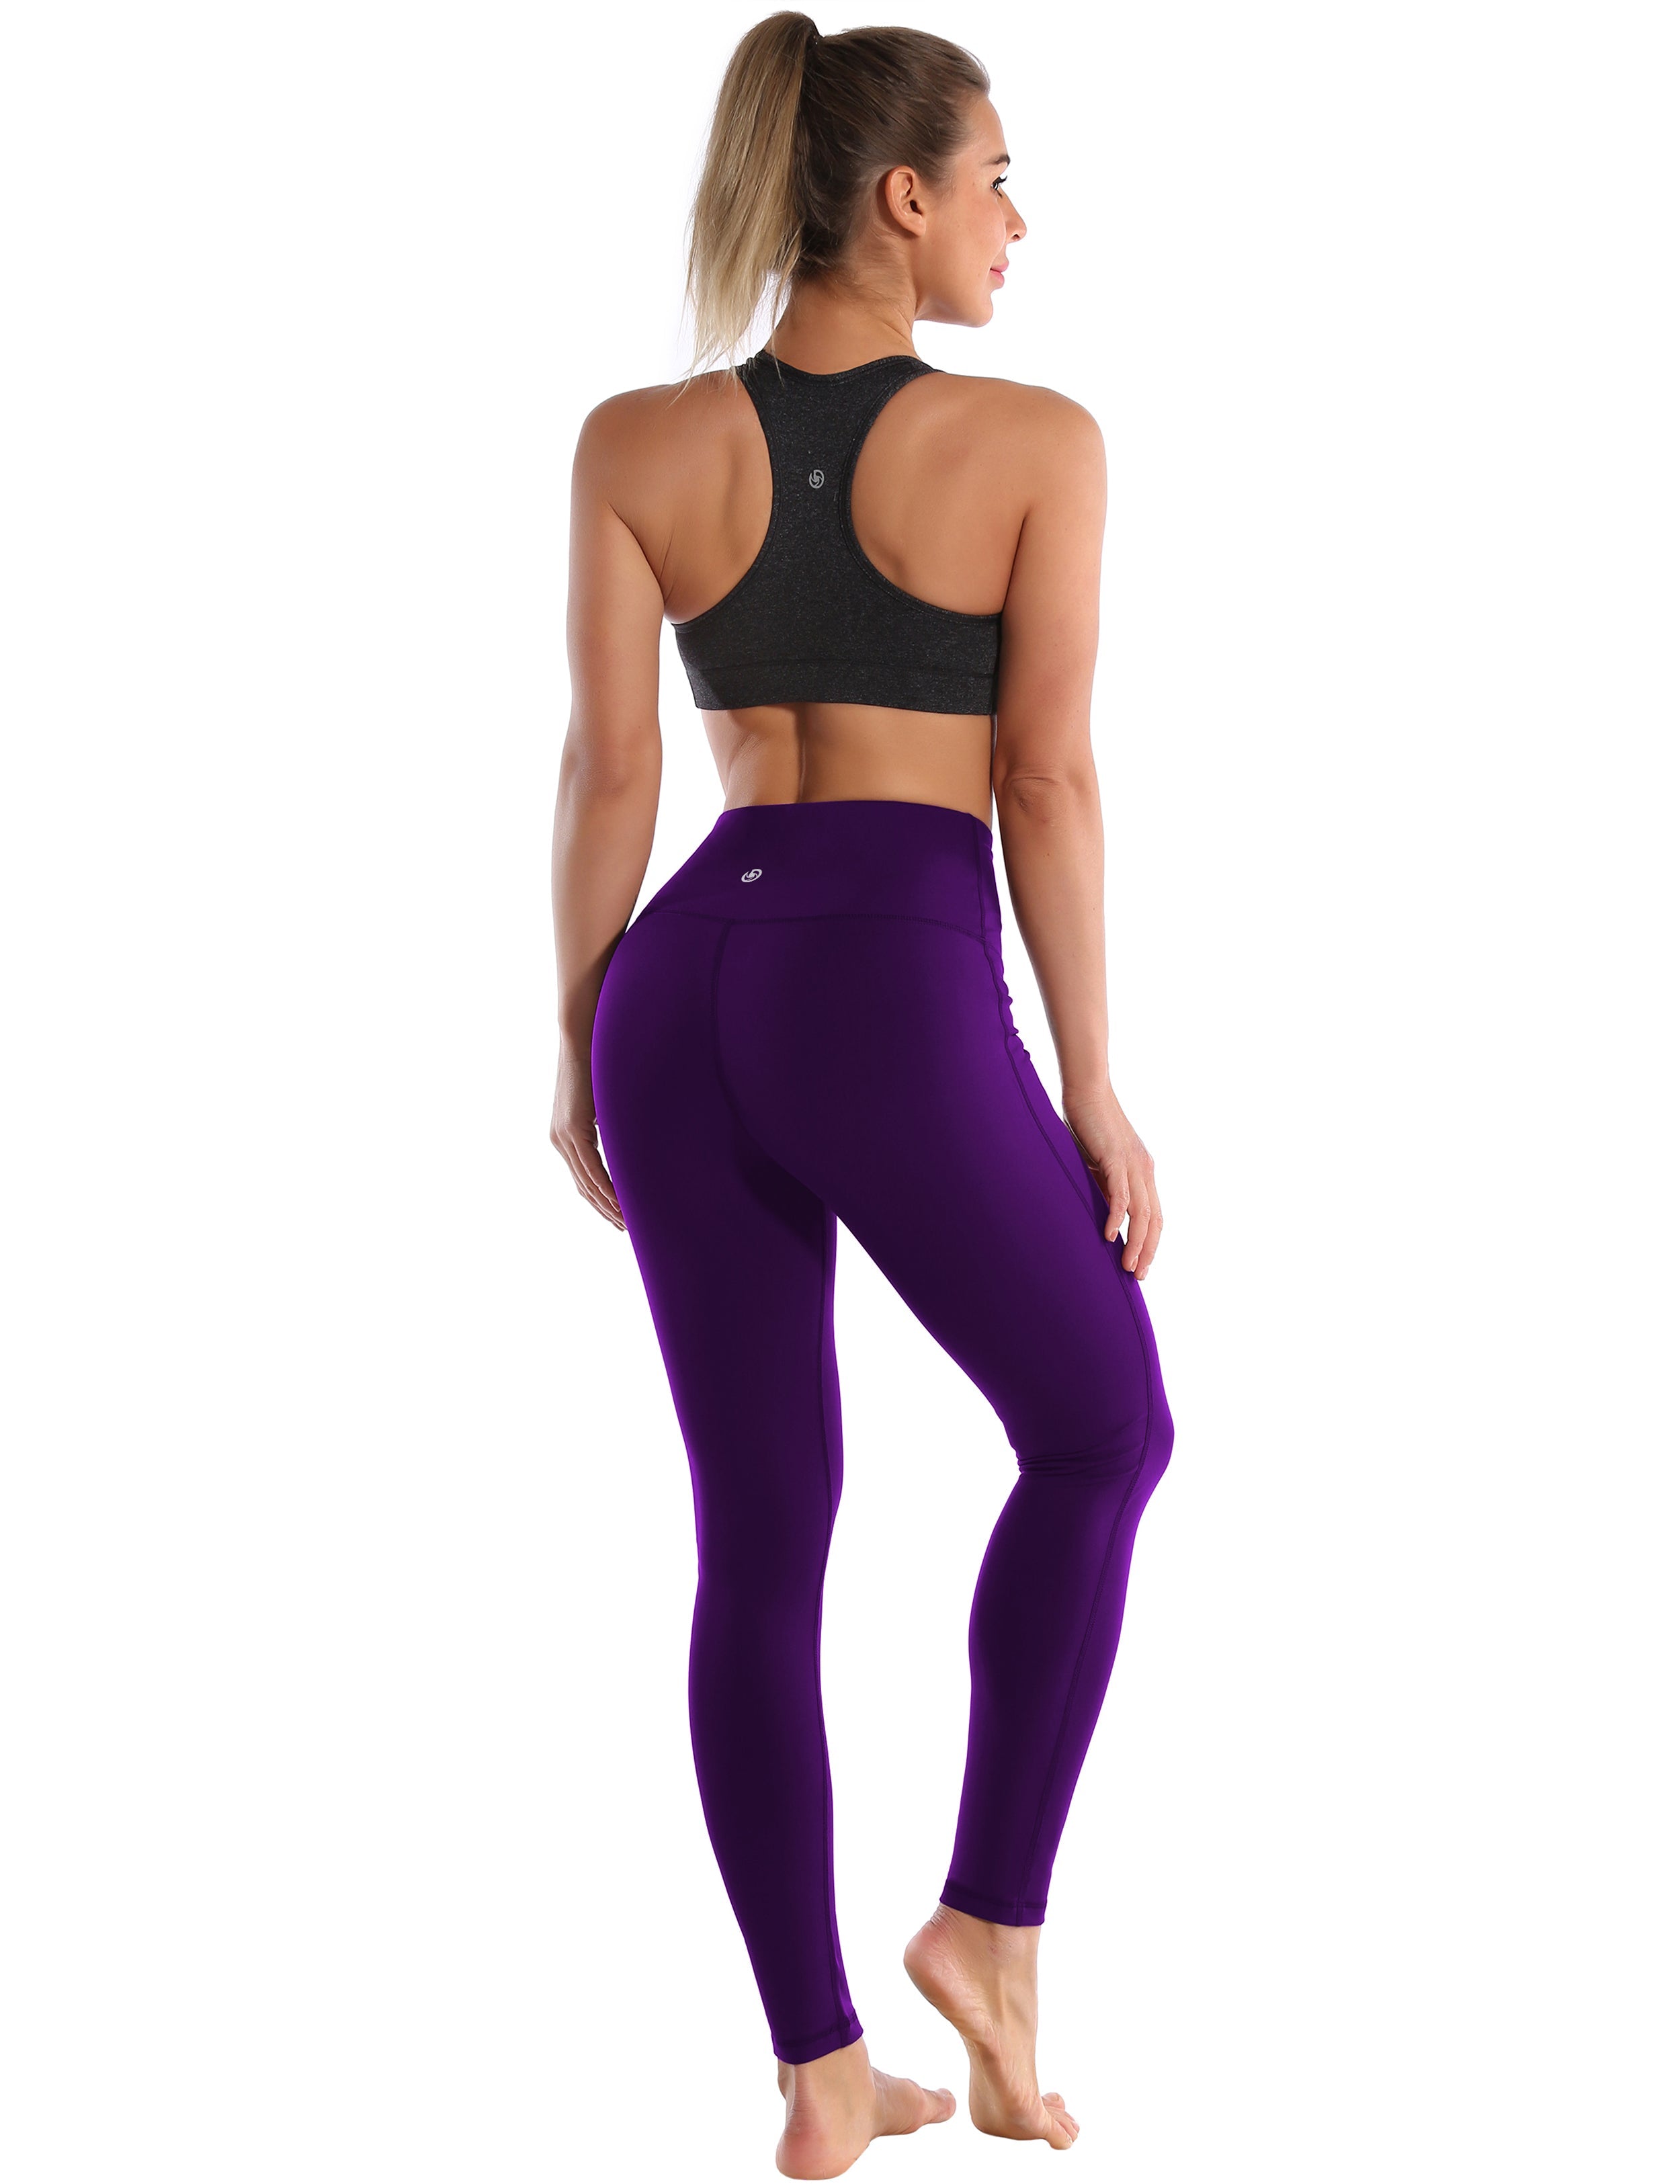 High Waist Side Line Jogging Pants eggplantpurple Side Line is Make Your Legs Look Longer and Thinner 75%Nylon/25%Spandex Fabric doesn't attract lint easily 4-way stretch No see-through Moisture-wicking Tummy control Inner pocket Two lengths